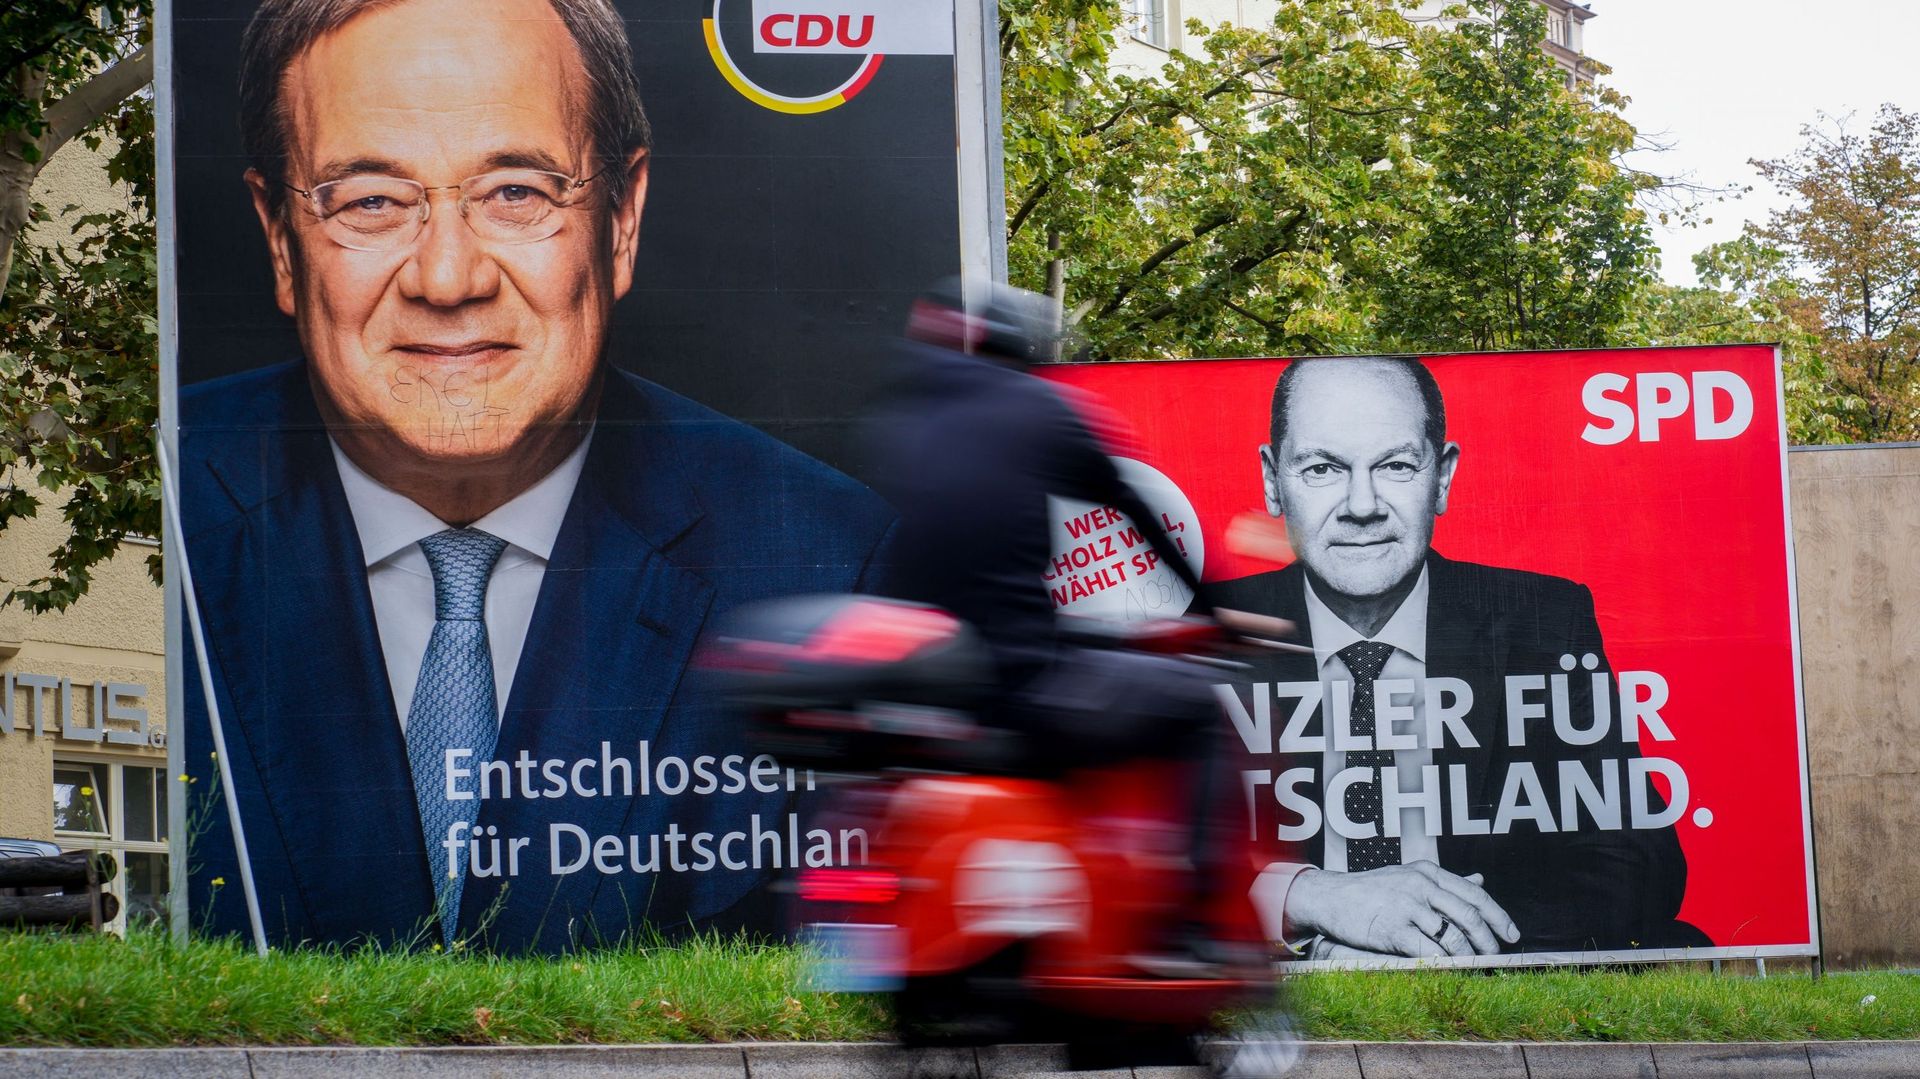 Election campaigns in Germany